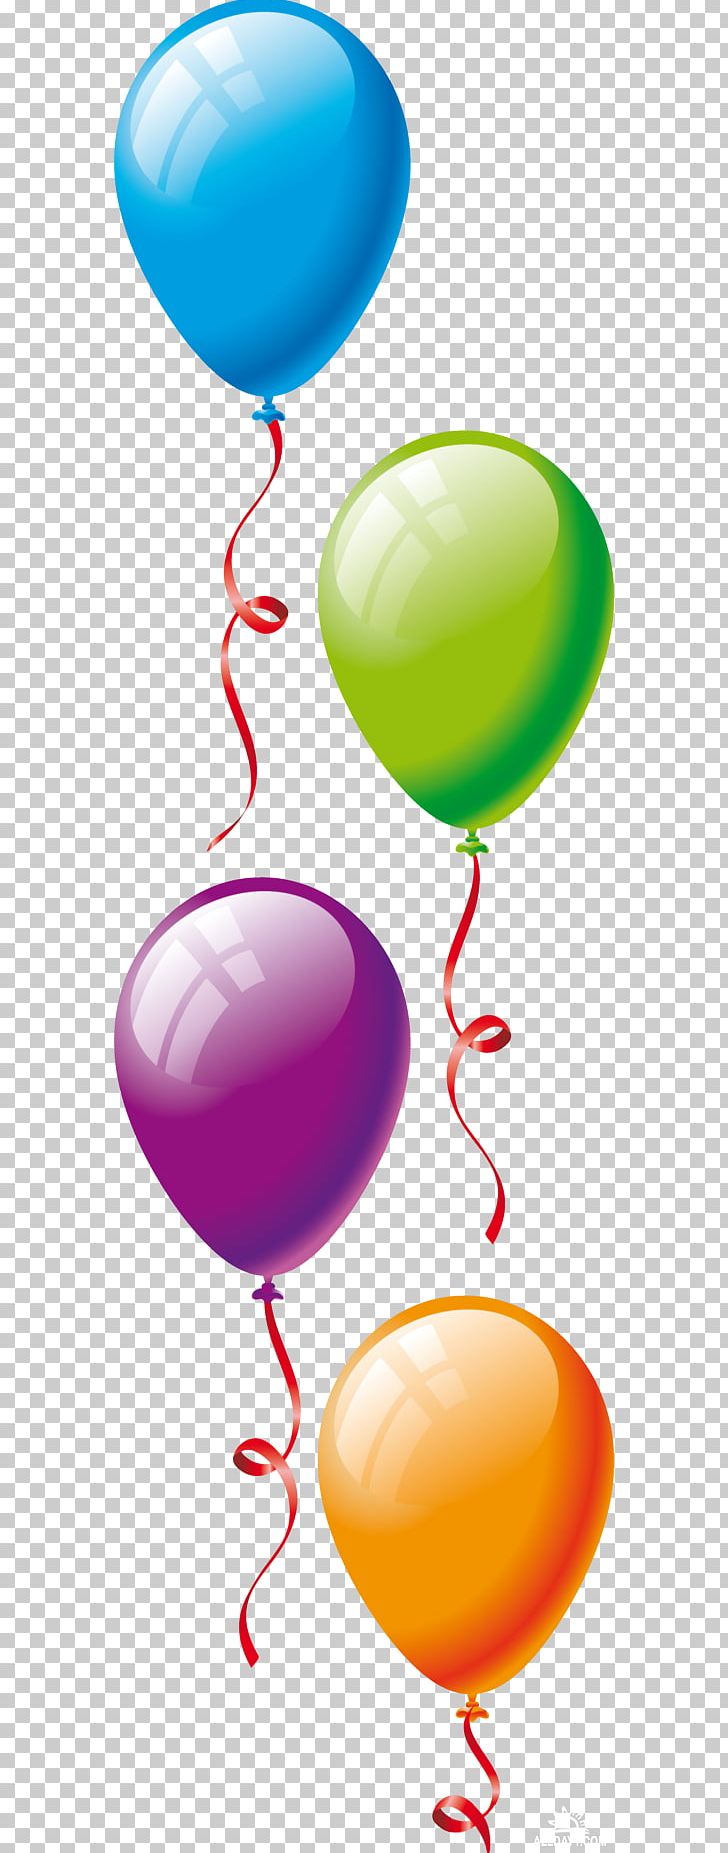 Balloon Birthday Holiday PNG, Clipart, Balloon, Birthday, Clip Art, Gift, Holiday Free PNG Download